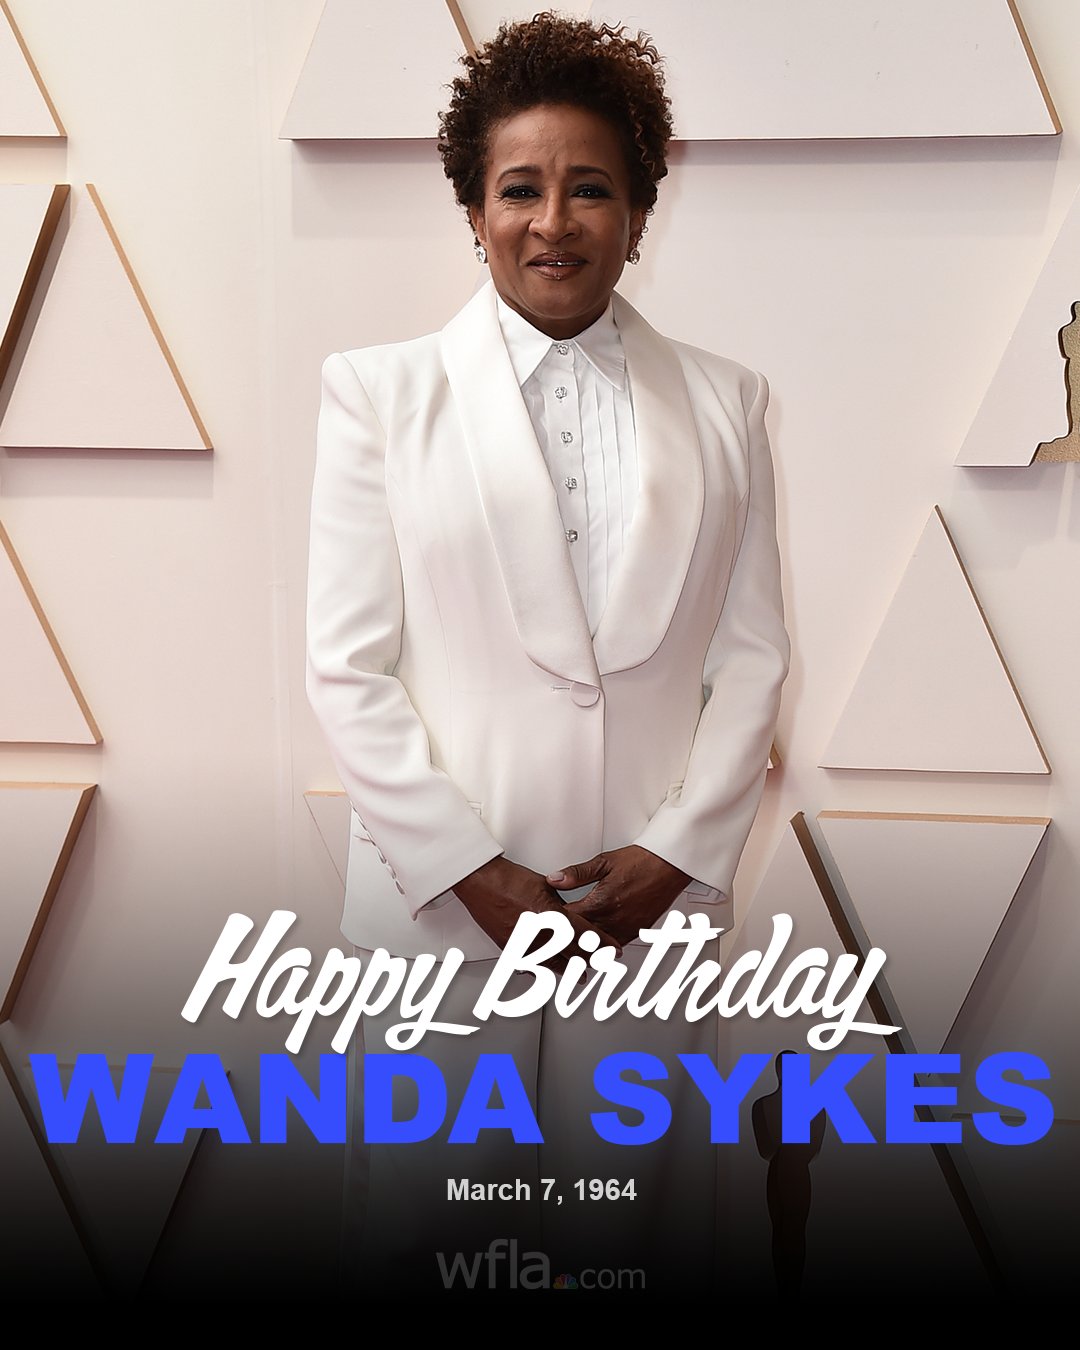 HAPPY BIRTHDAY, WANDA SYKES The stand-up comedian and actress turns 59 today!  